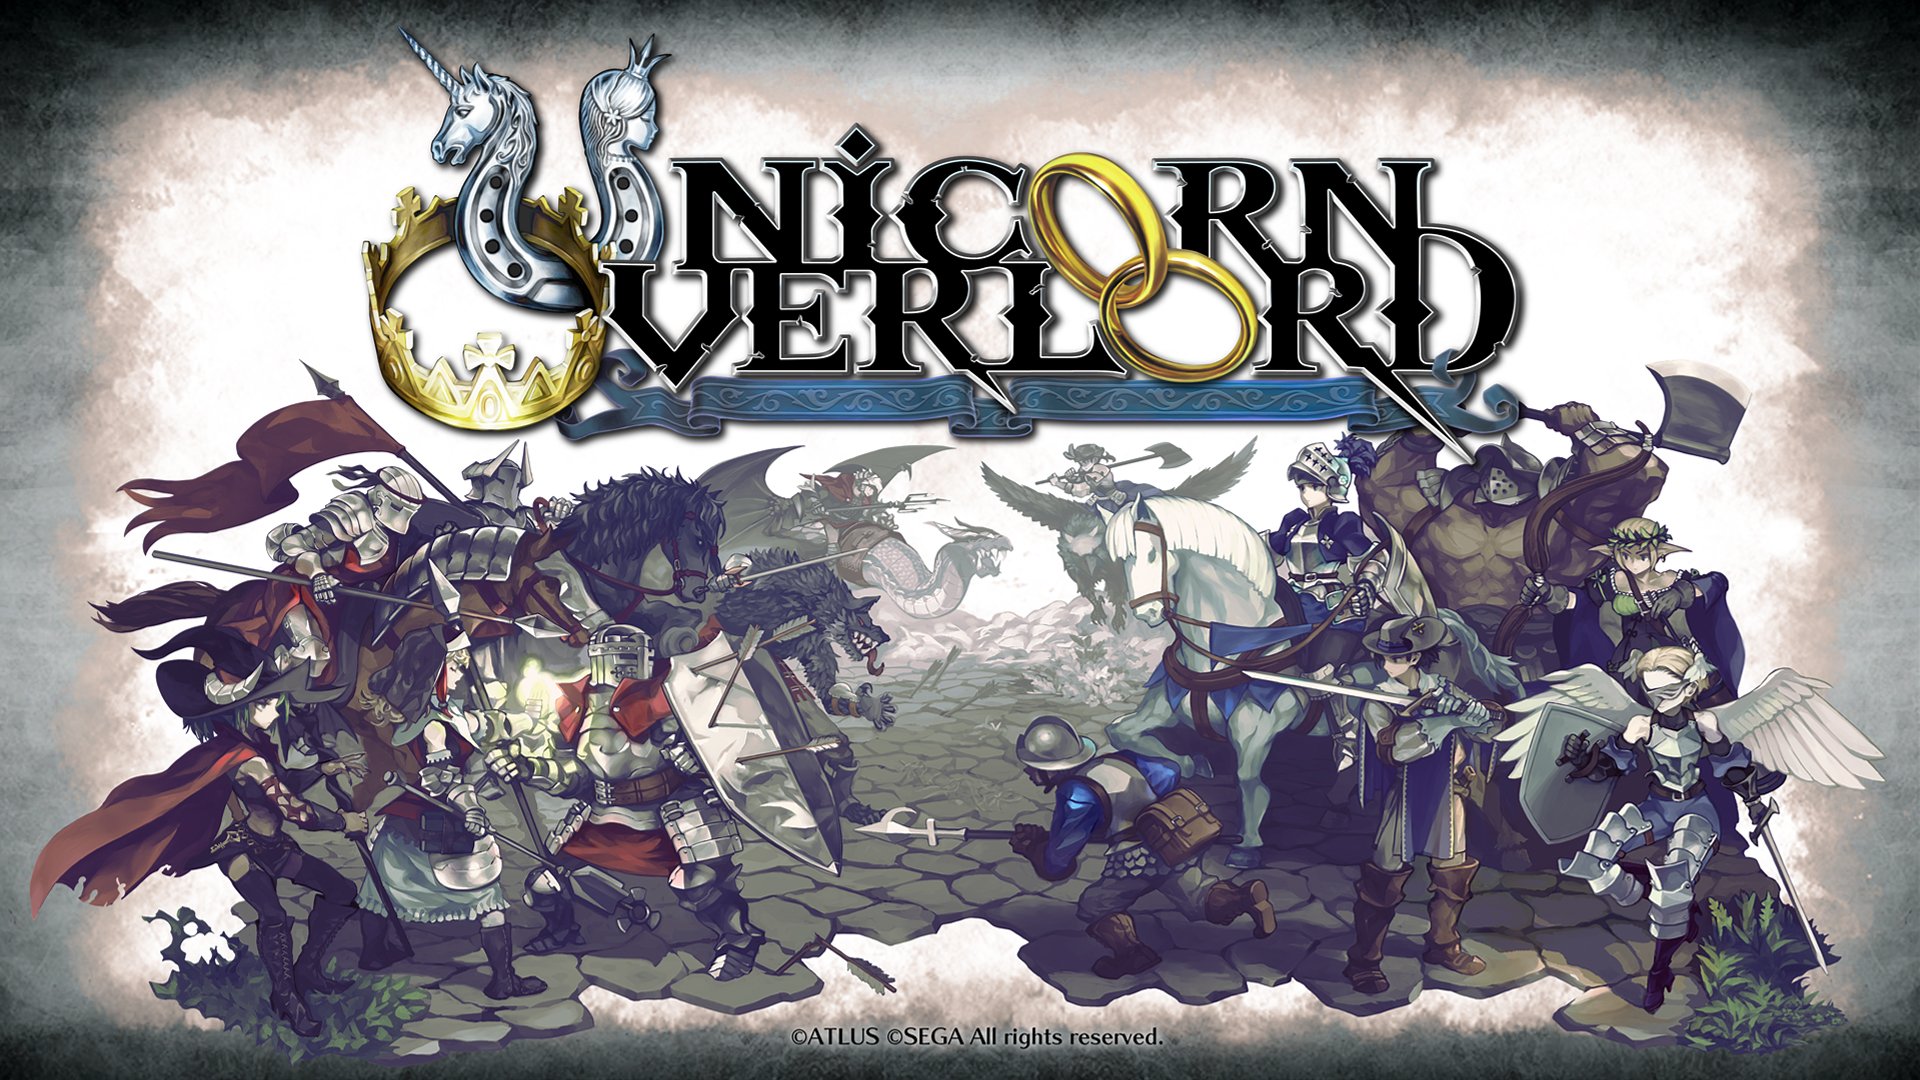 Unicorn Overlord is a Fantasy Tactics RPG by the Studio Behind 13 Sentinels: Aegis Rim